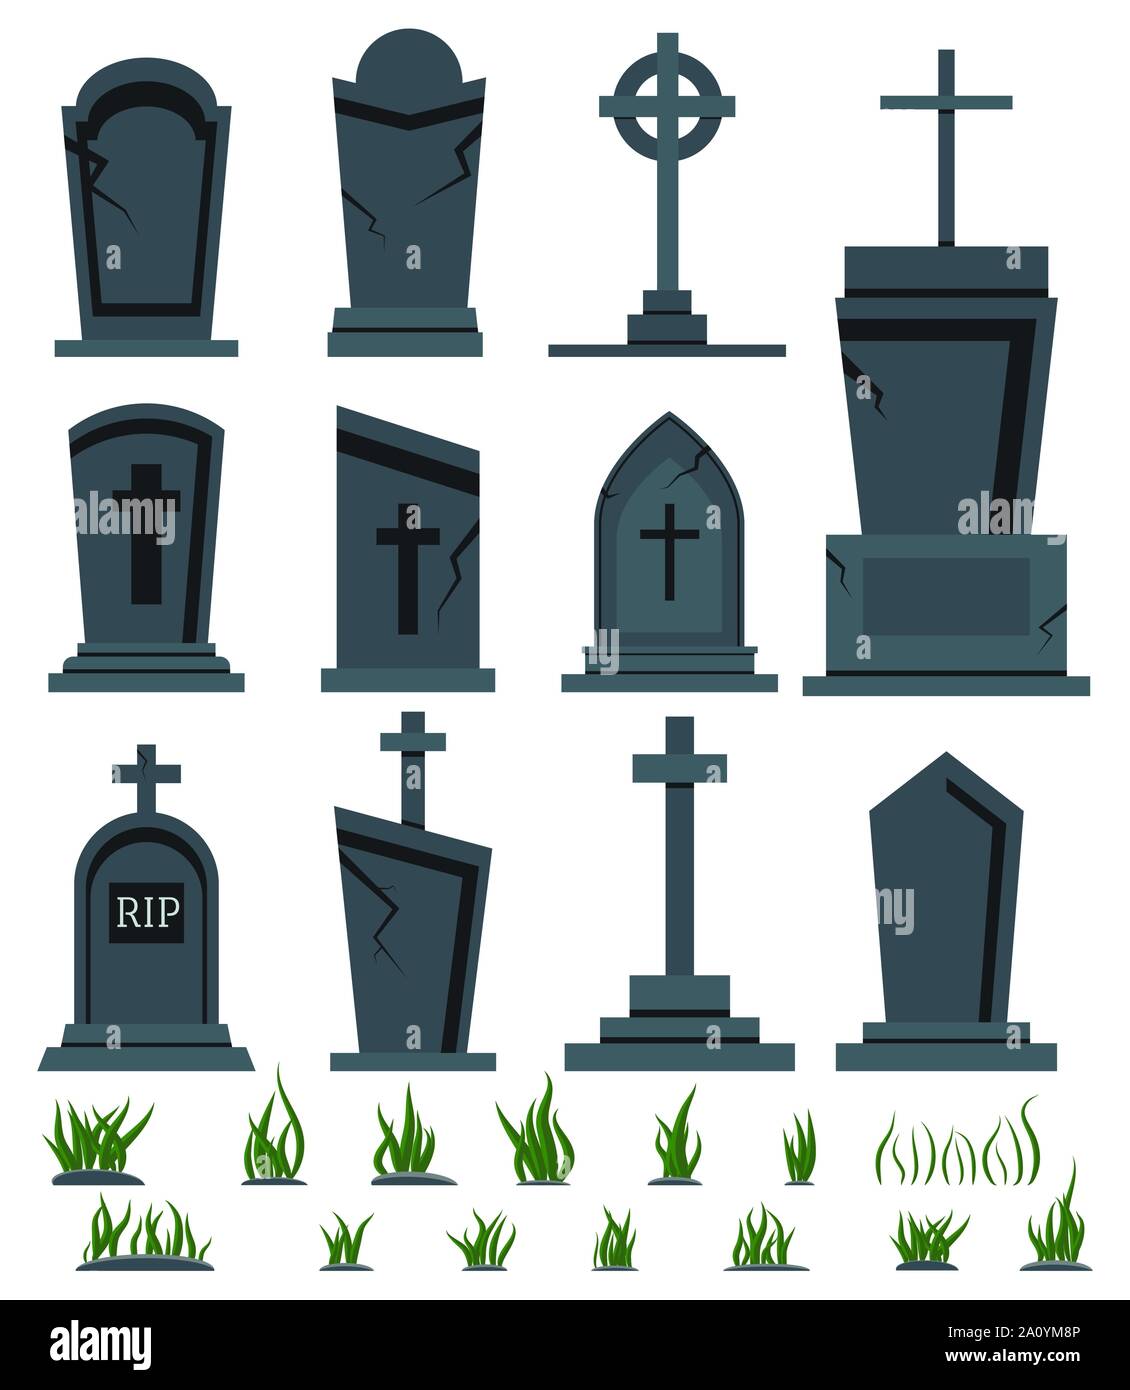 Free: Gray tombstone illustration, Halloween Witch , Halloween RIP  Tombstone transparent background PNG clipart 